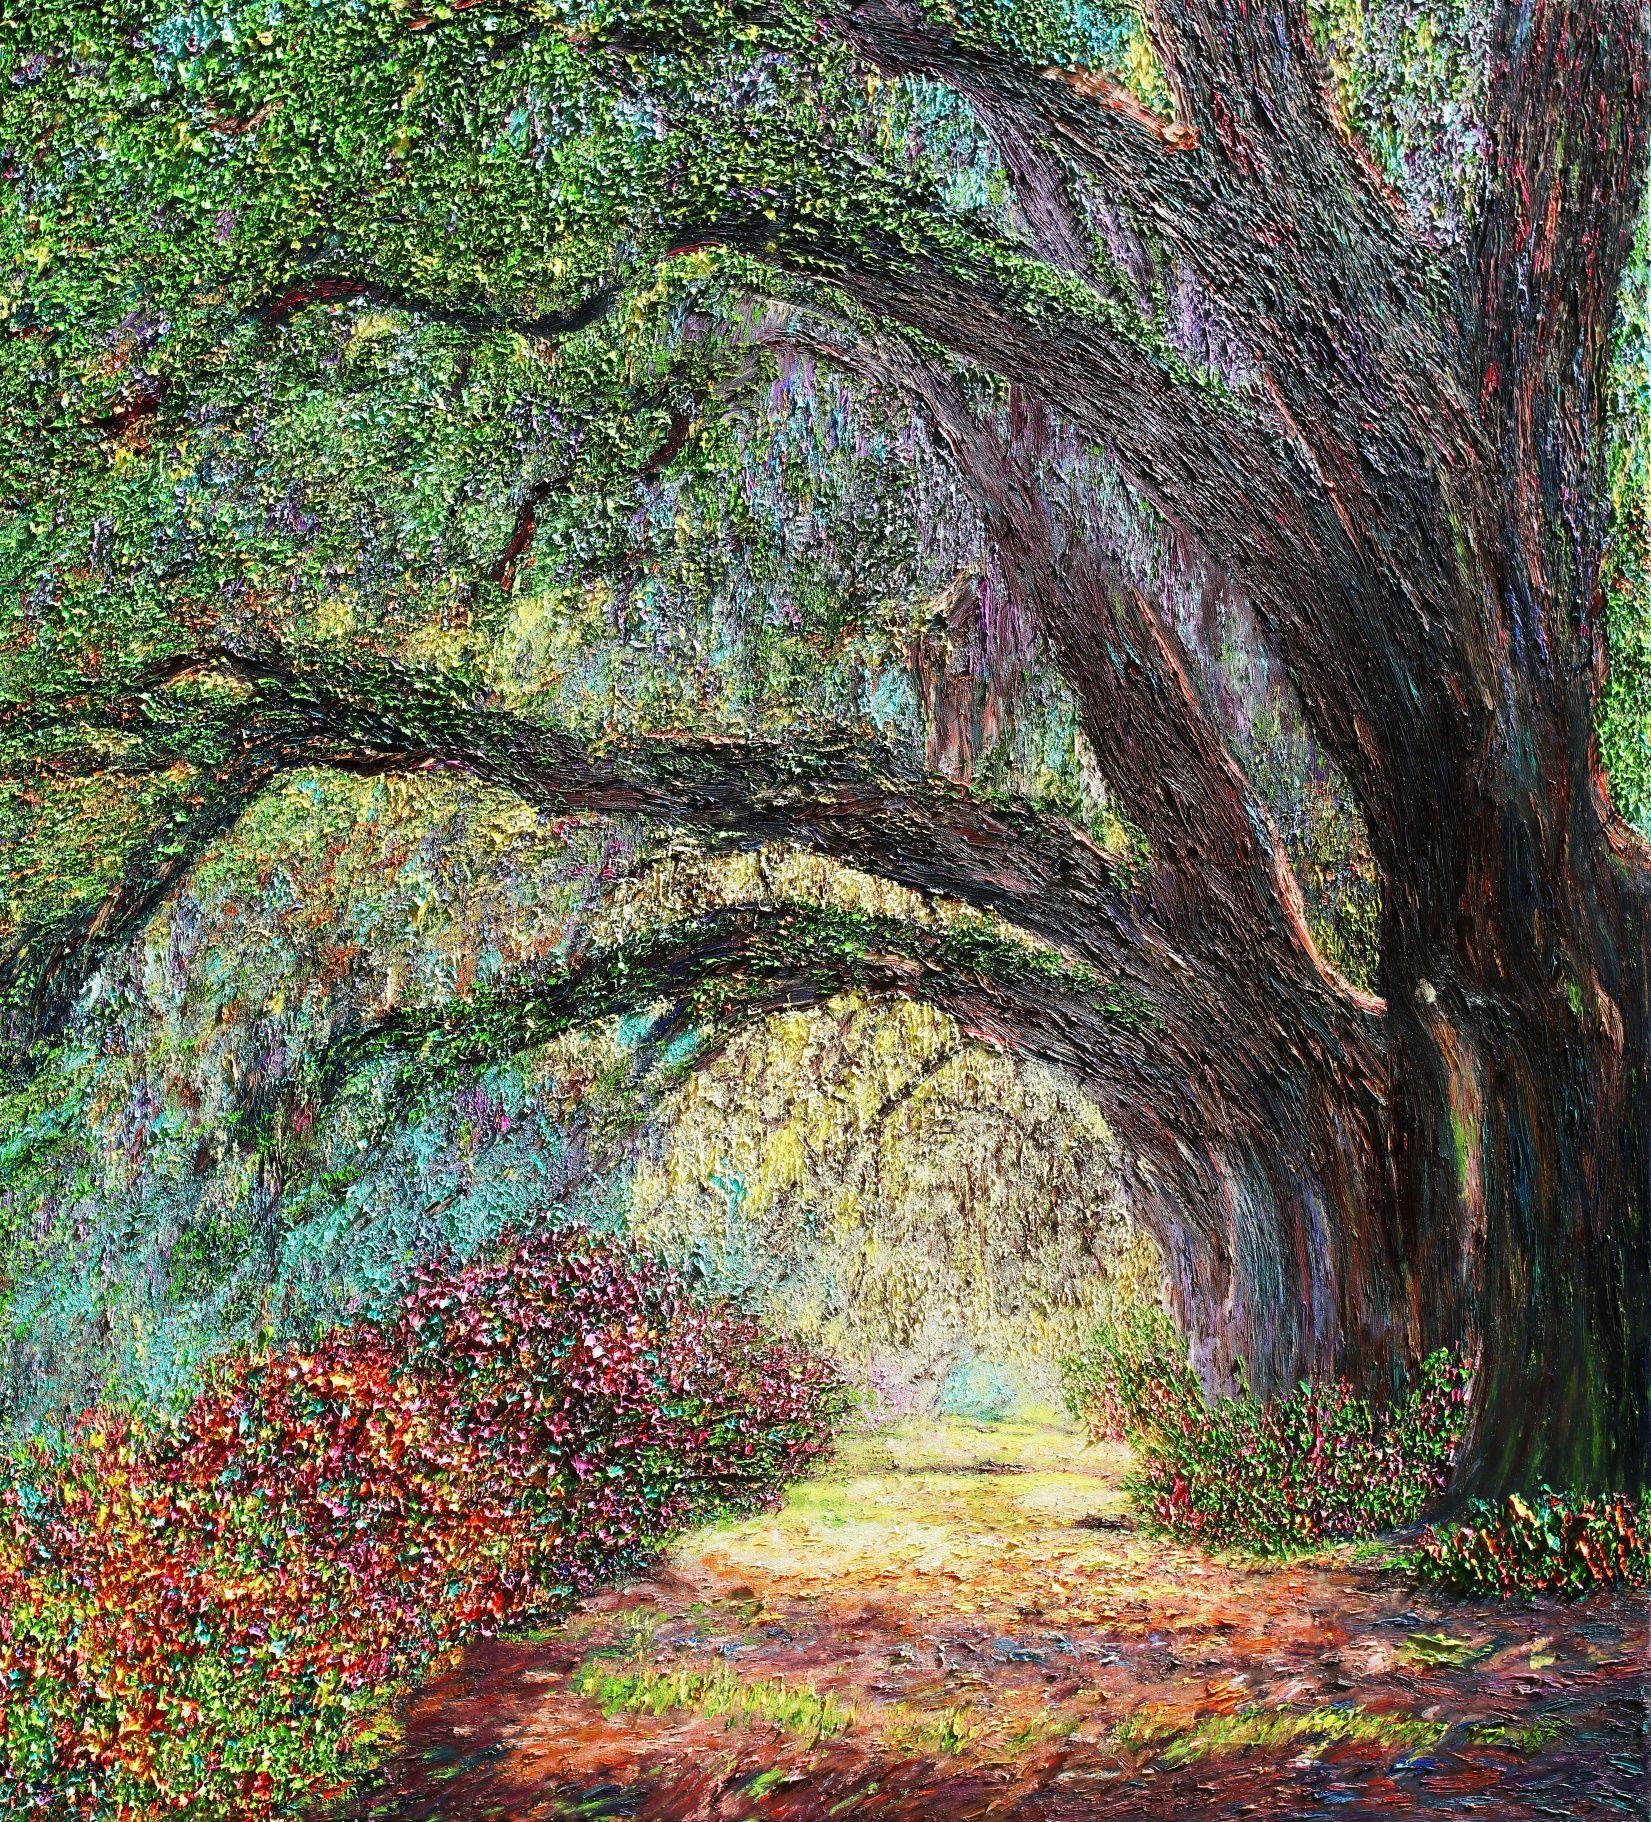 A Summerâ€™s Trail 60x54: â€œThere are so many beautiful examples of nature in this world.      A bright but gentle representation of a seasoned trail with the glow of intense sunlight cascading in the distance. Resplendent in bright colors this